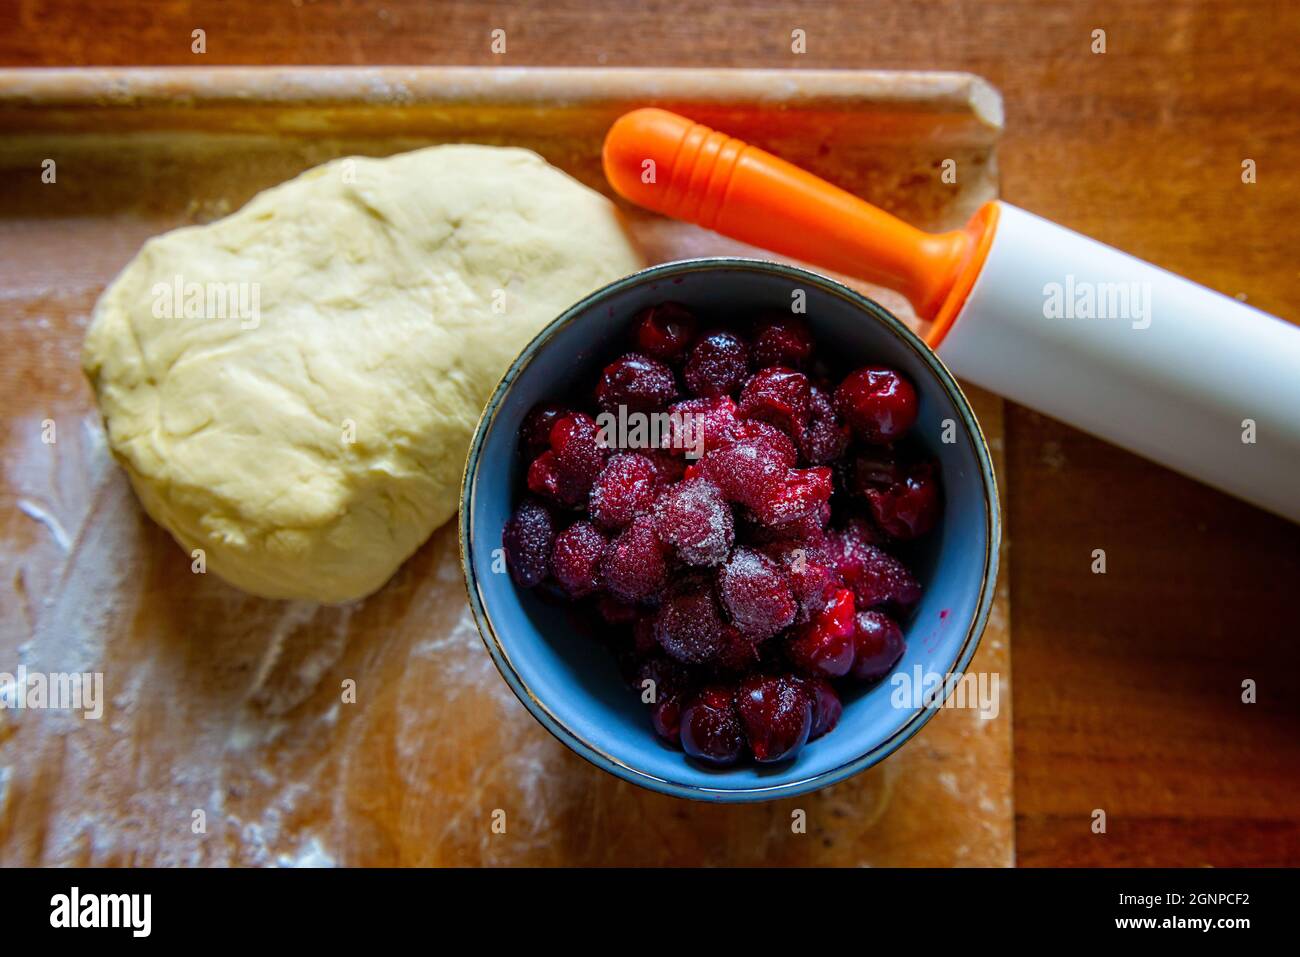 Making dumplings filled with sour cherry with sugar on a wooden cutting board, or cherru cake Stock Photo